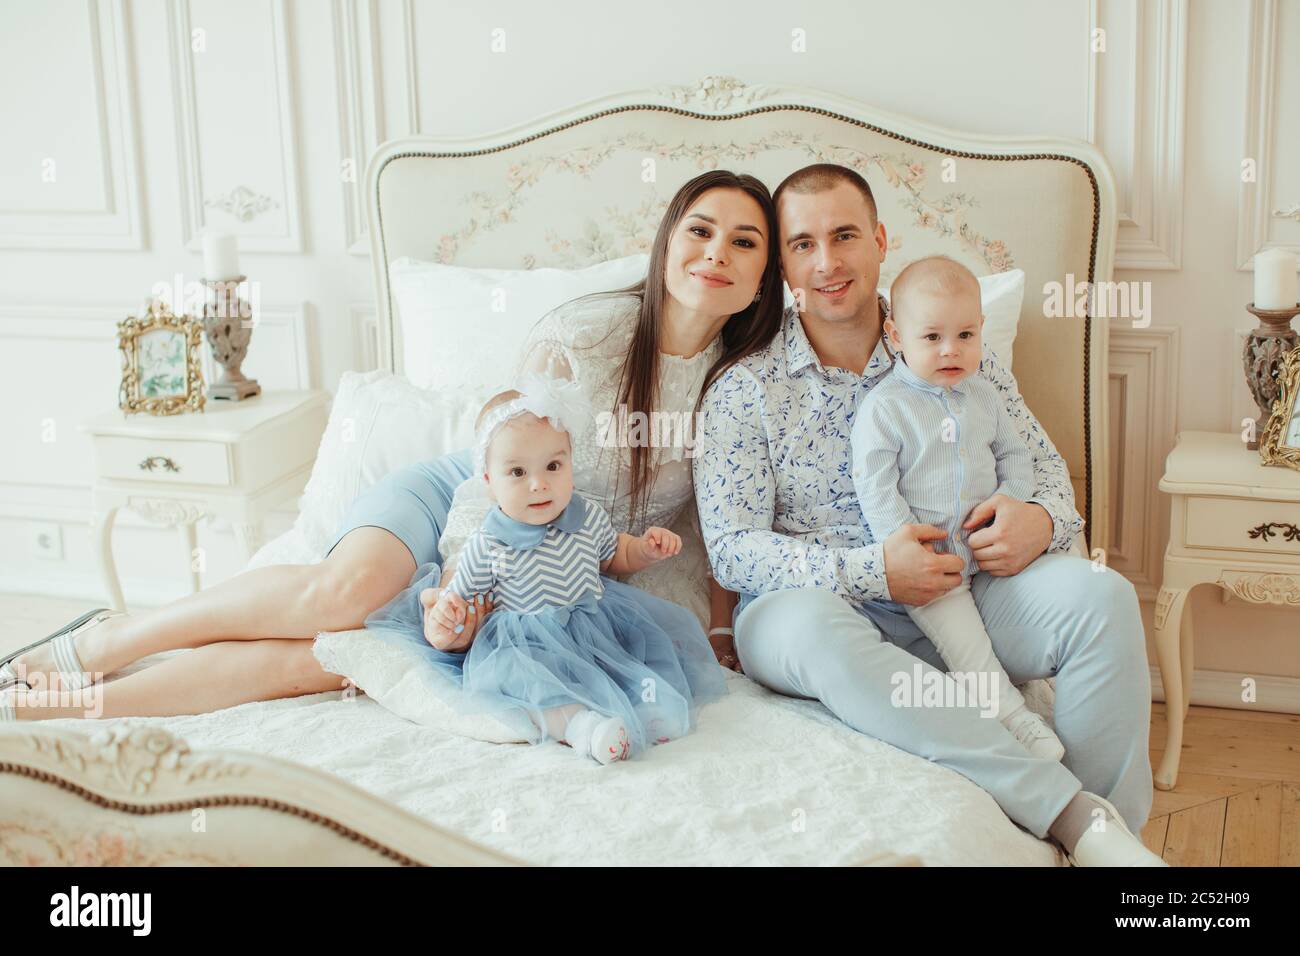 Portrait of a family sitting on a bed Stock Photo